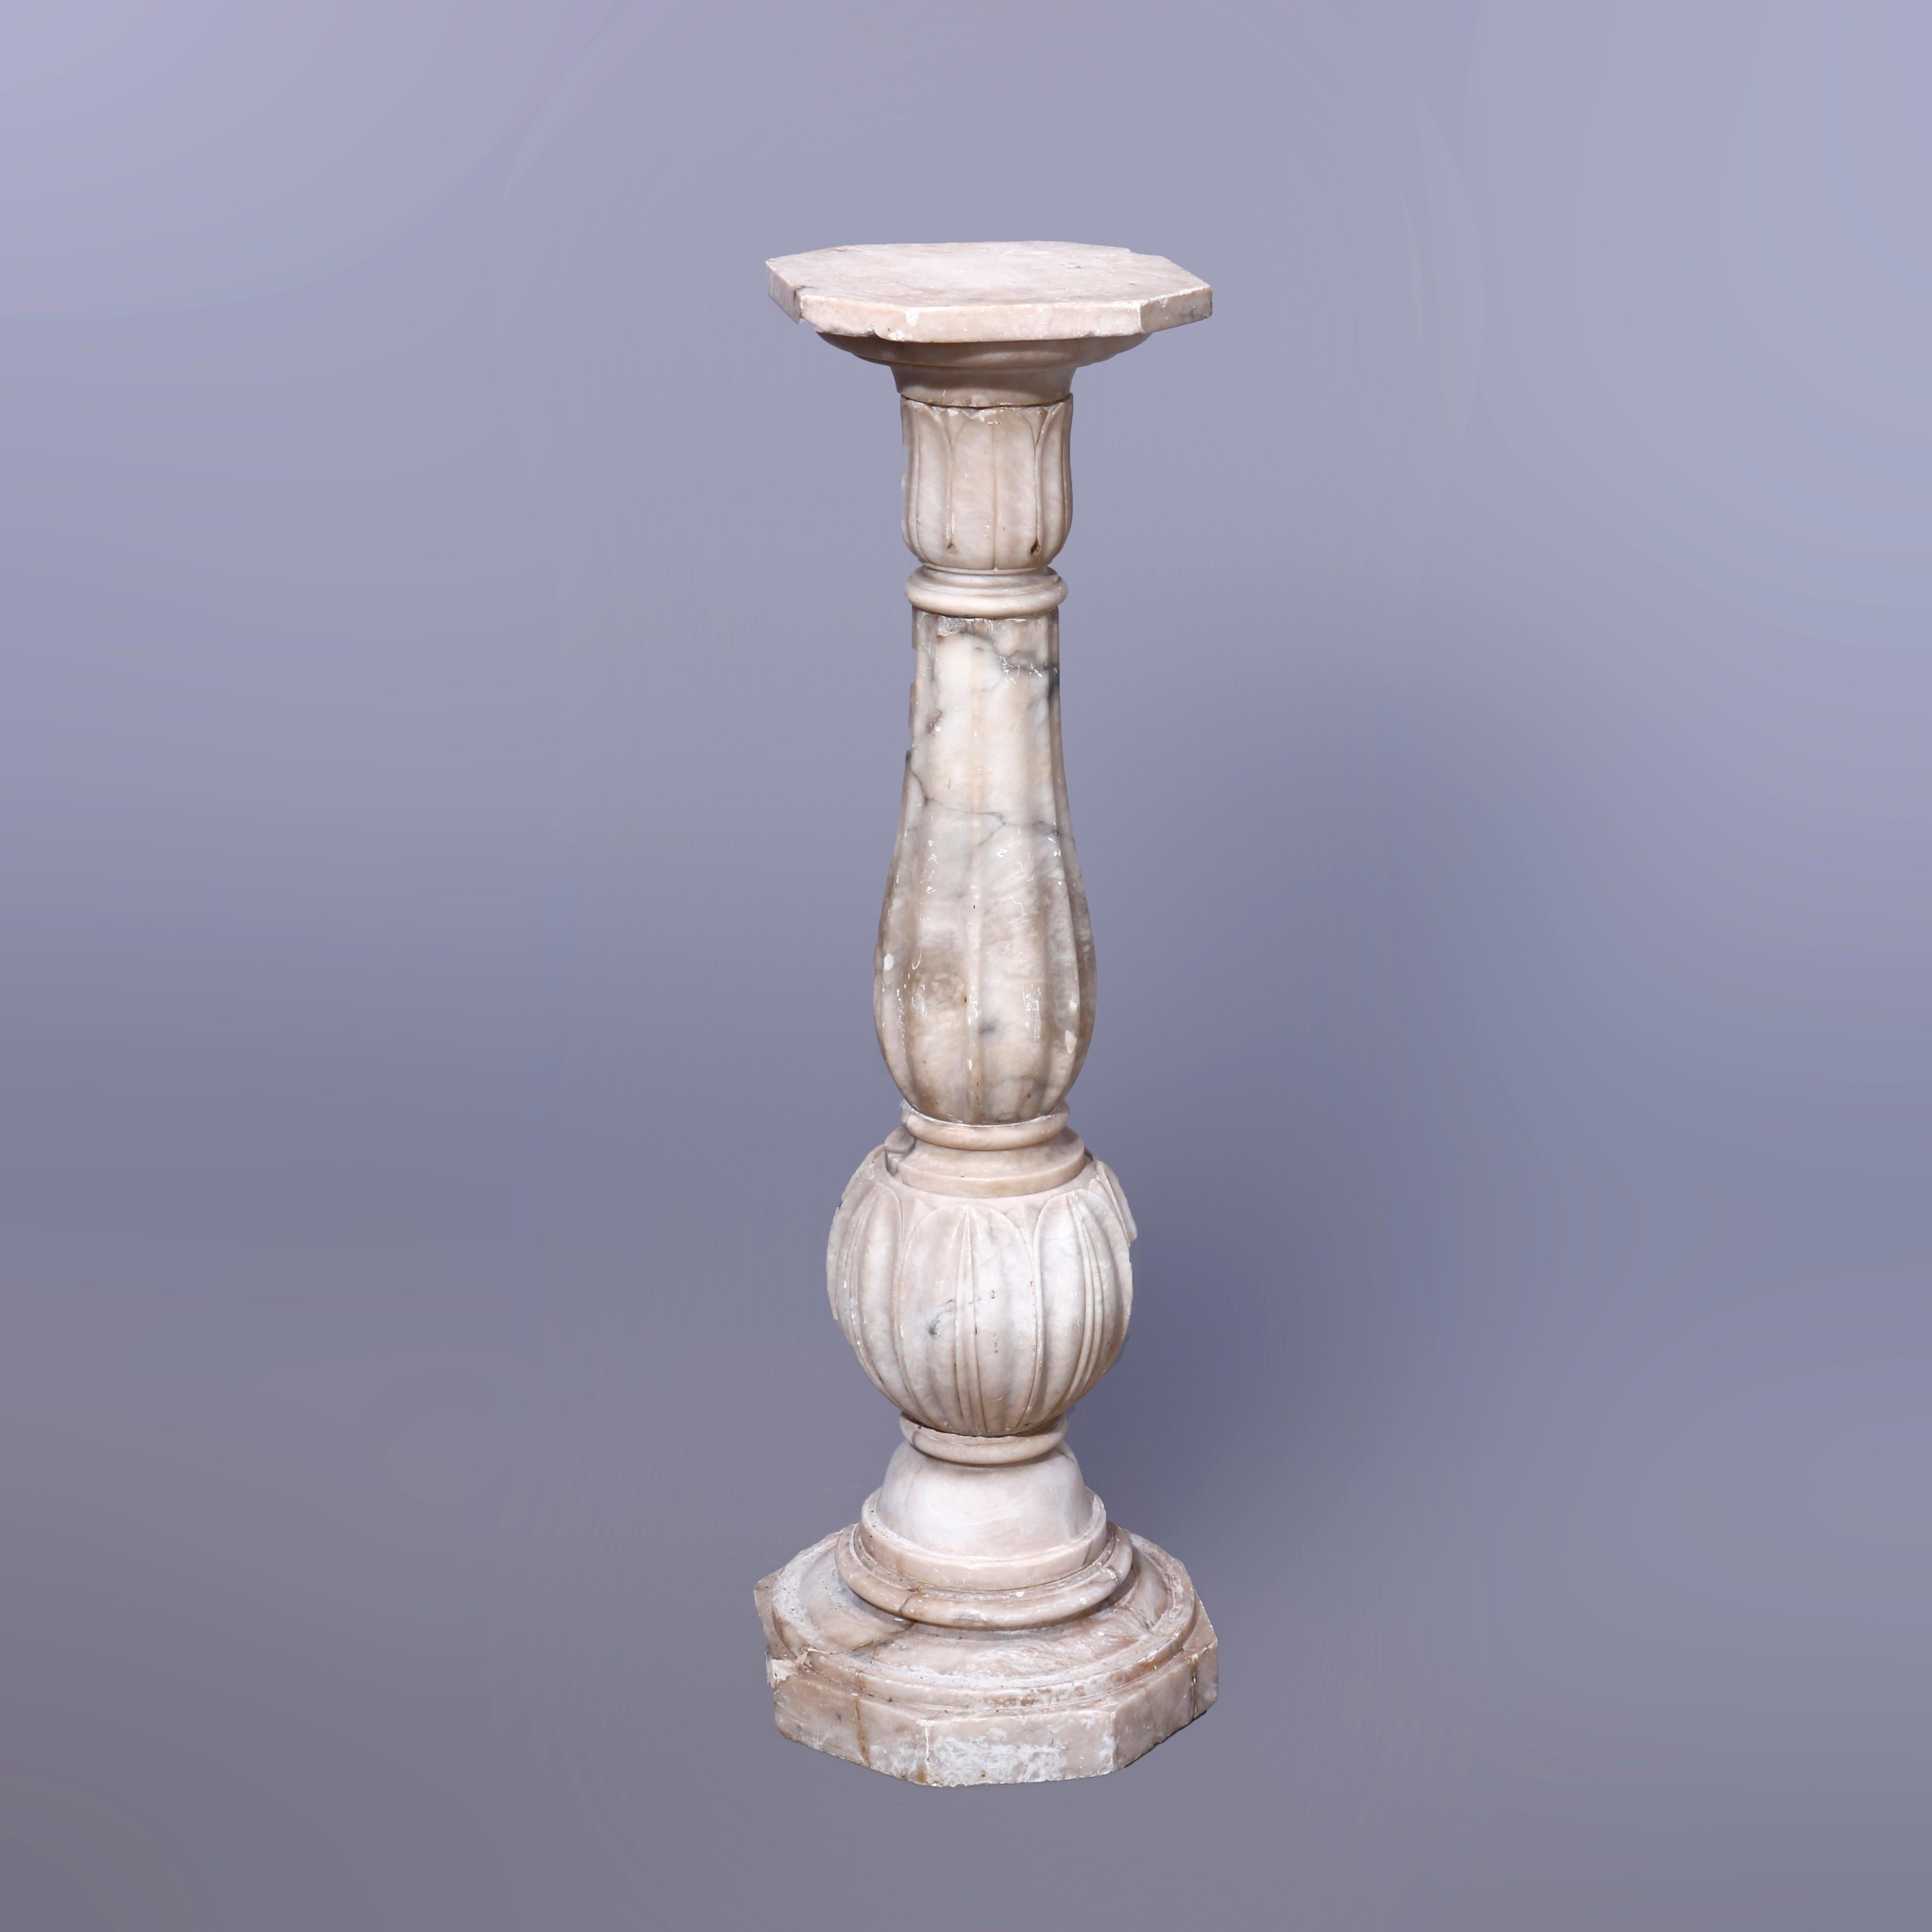 An antique neoclassical sculpture pedestal offers carved marble construction with clipped corner display over melon reeded column having acanthus foliate bands, raised on flared base, c1890

Measures - 40.5''H x 12.5''W x 12.5''D.

Catalogue Note: